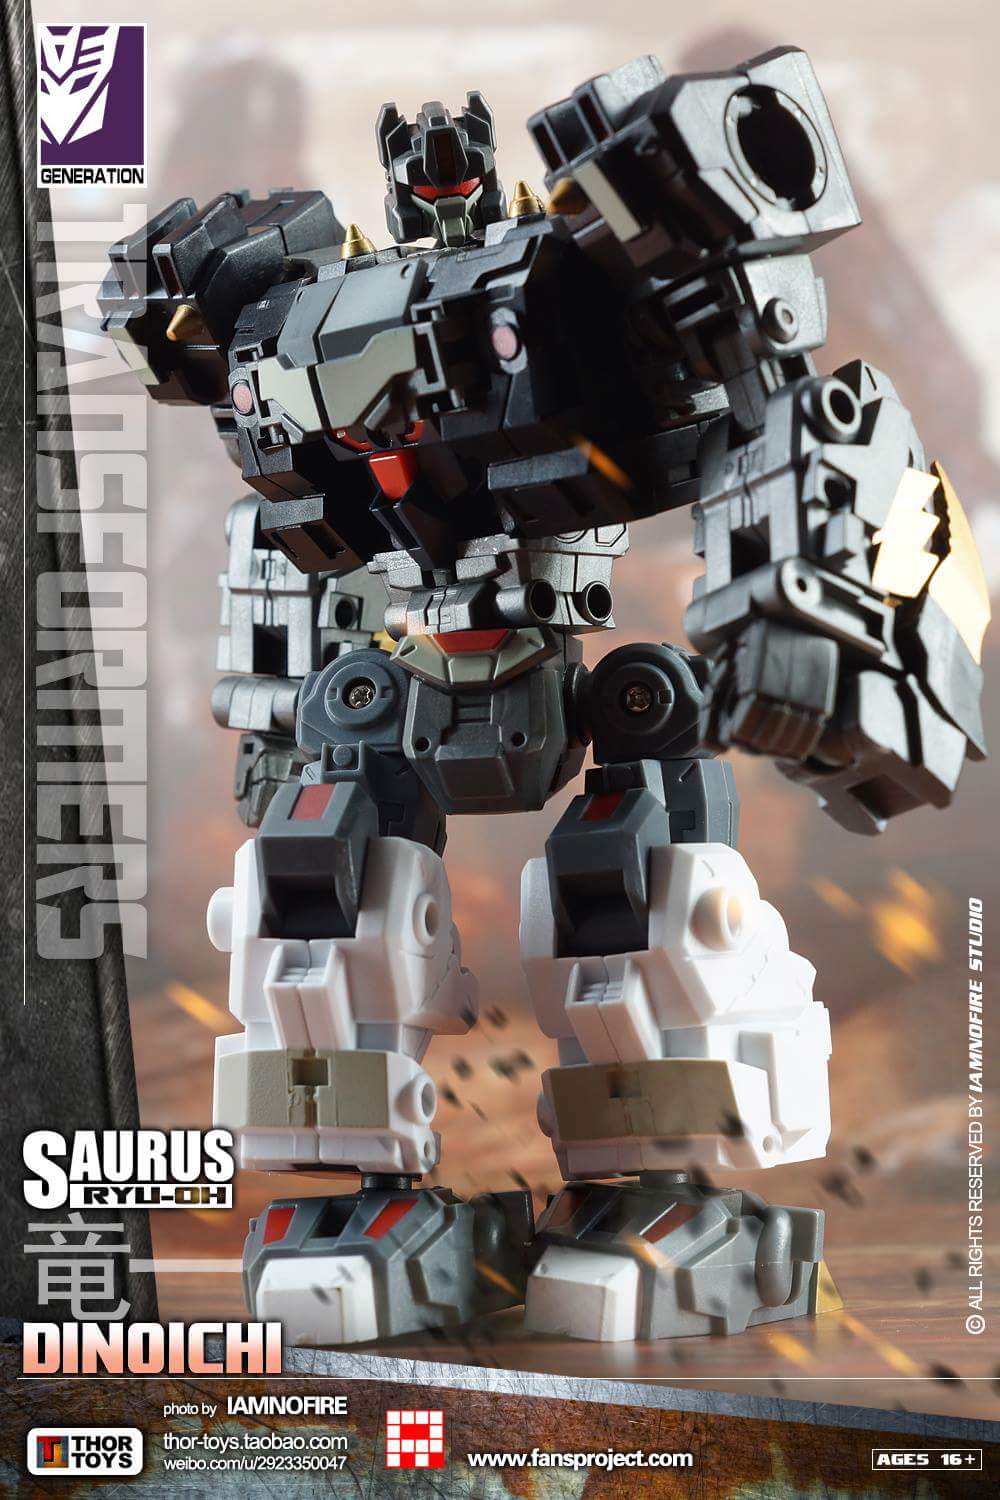 [FansProject] Produit Tiers - Ryu-Oh aka Dinoking (Victory) | Beastructor aka Monstructor (USA) - Page 2 CJuy8bT8